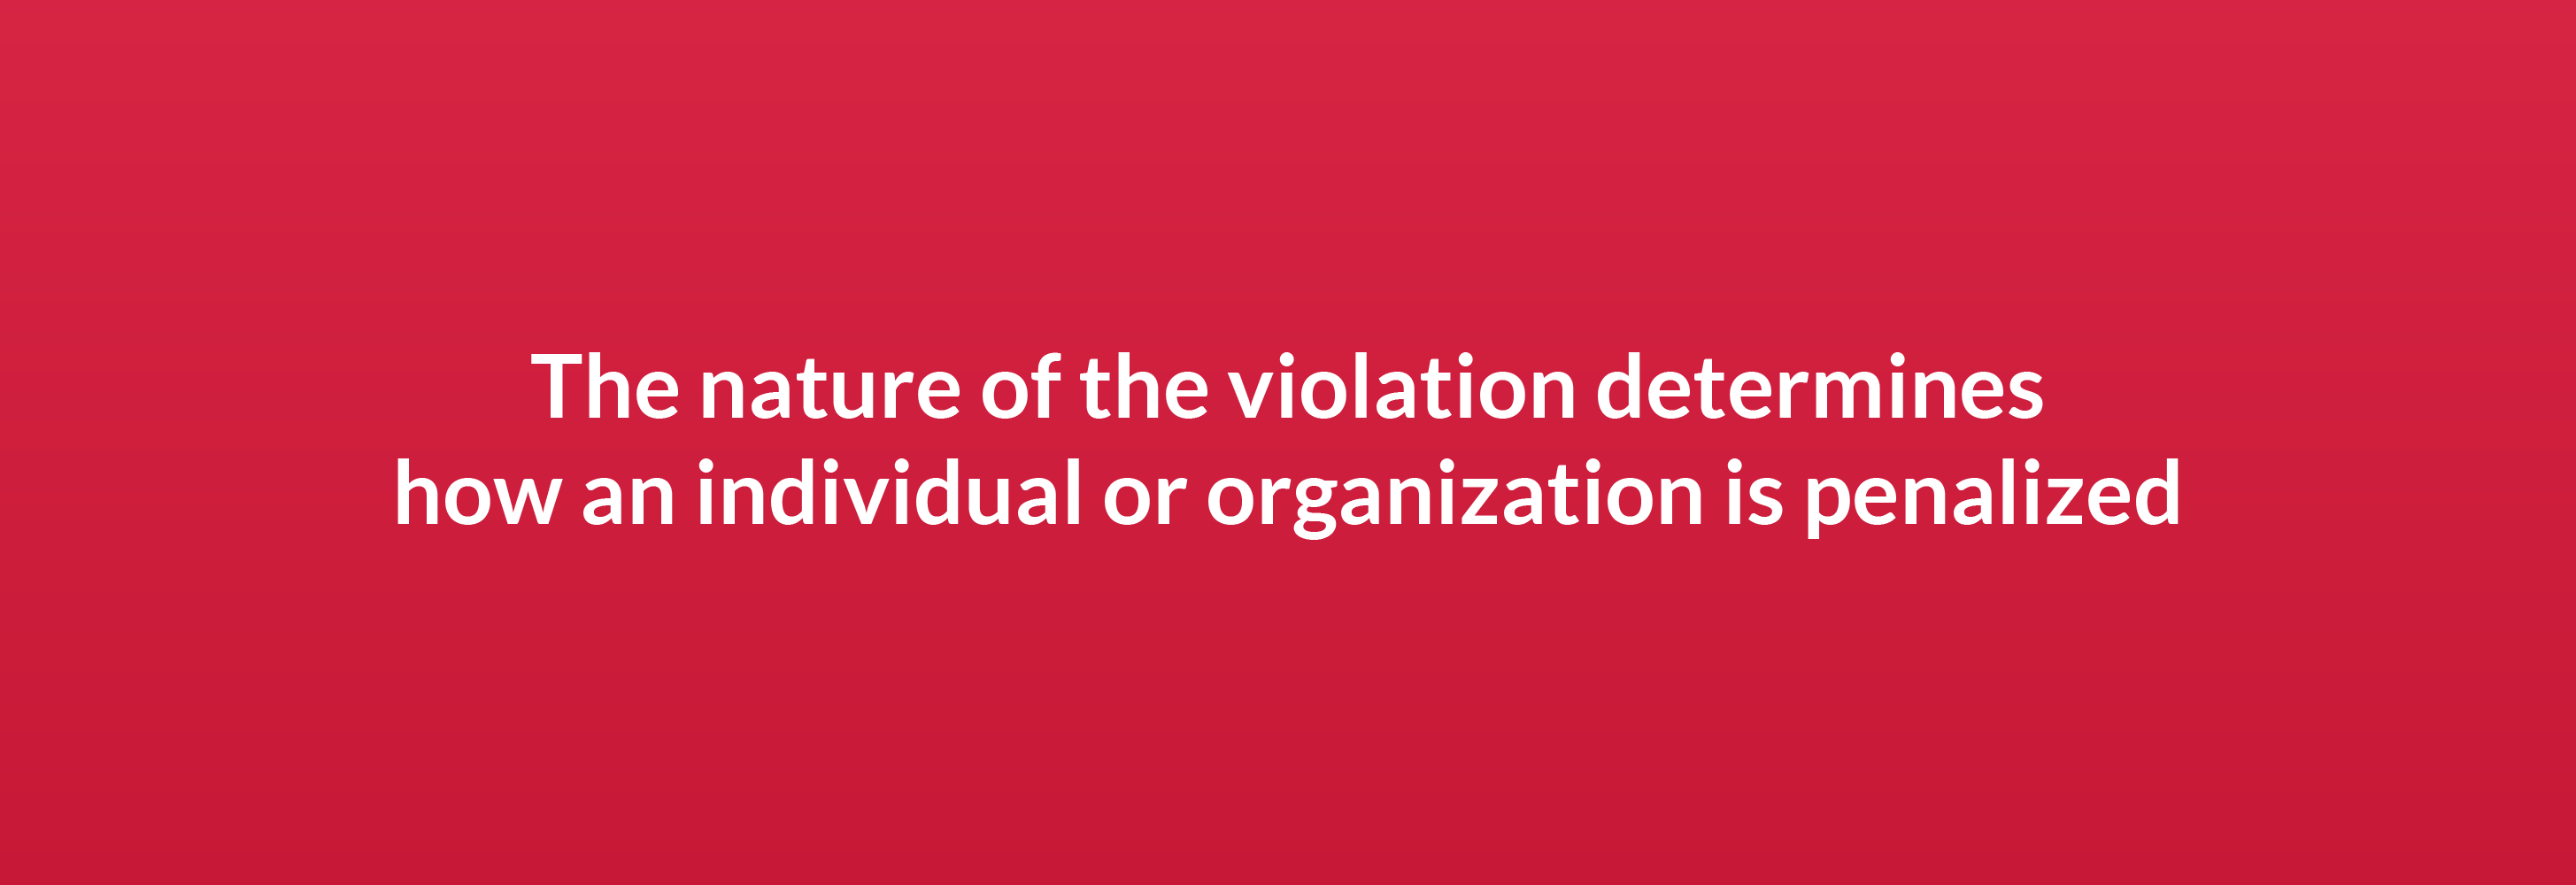 The nature of the violation determines how an individual or organization is penalized